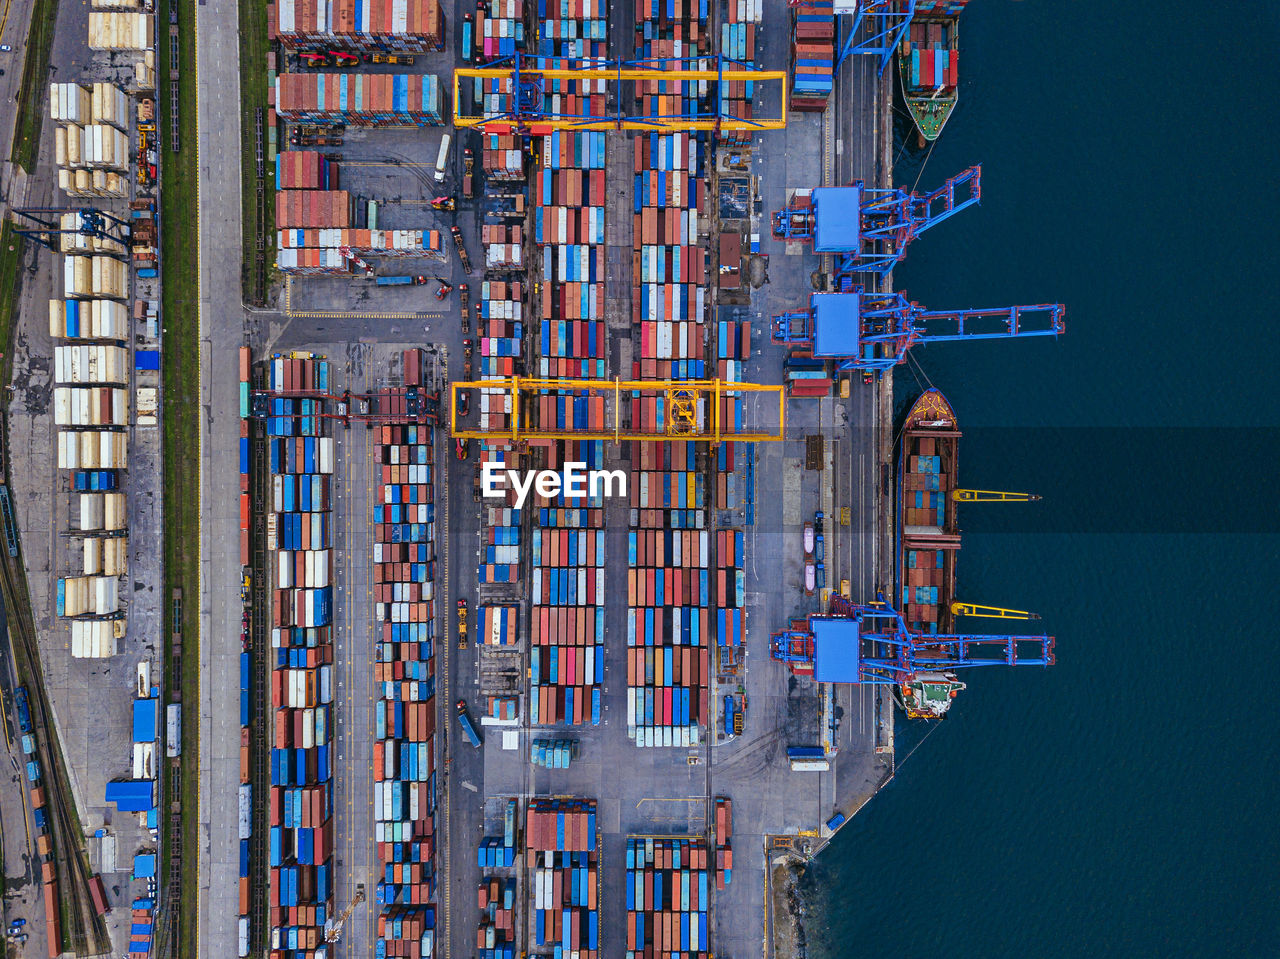 Russia, primorsky krai, vladivostok, aerial view of cargo containers in commercial dock